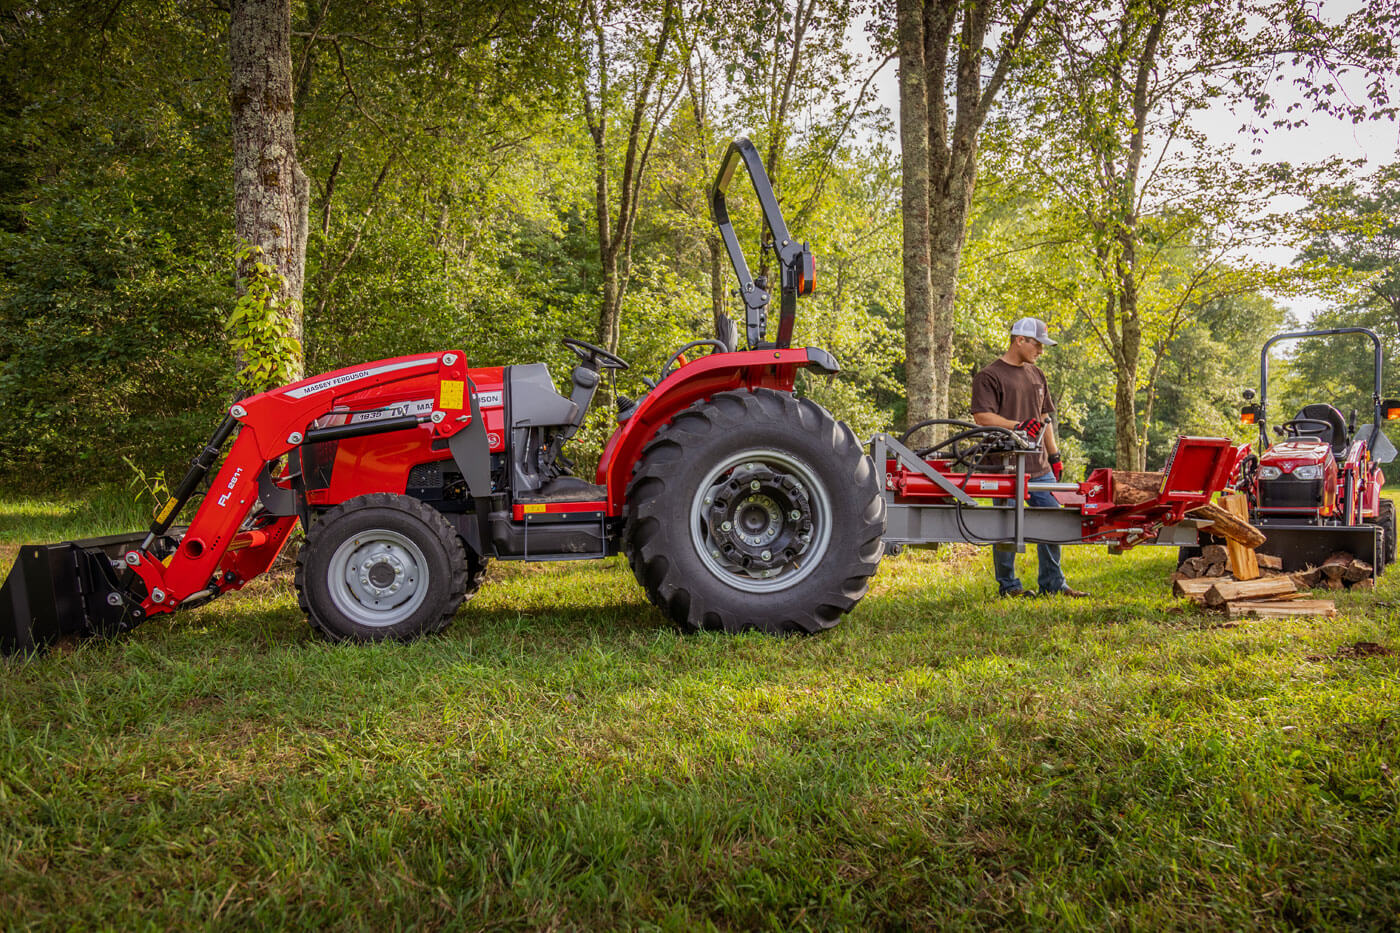 MF 1800 M Series | Woods Massey Ferguson Red Implement Instant Rebate with MF Tractor Purchase